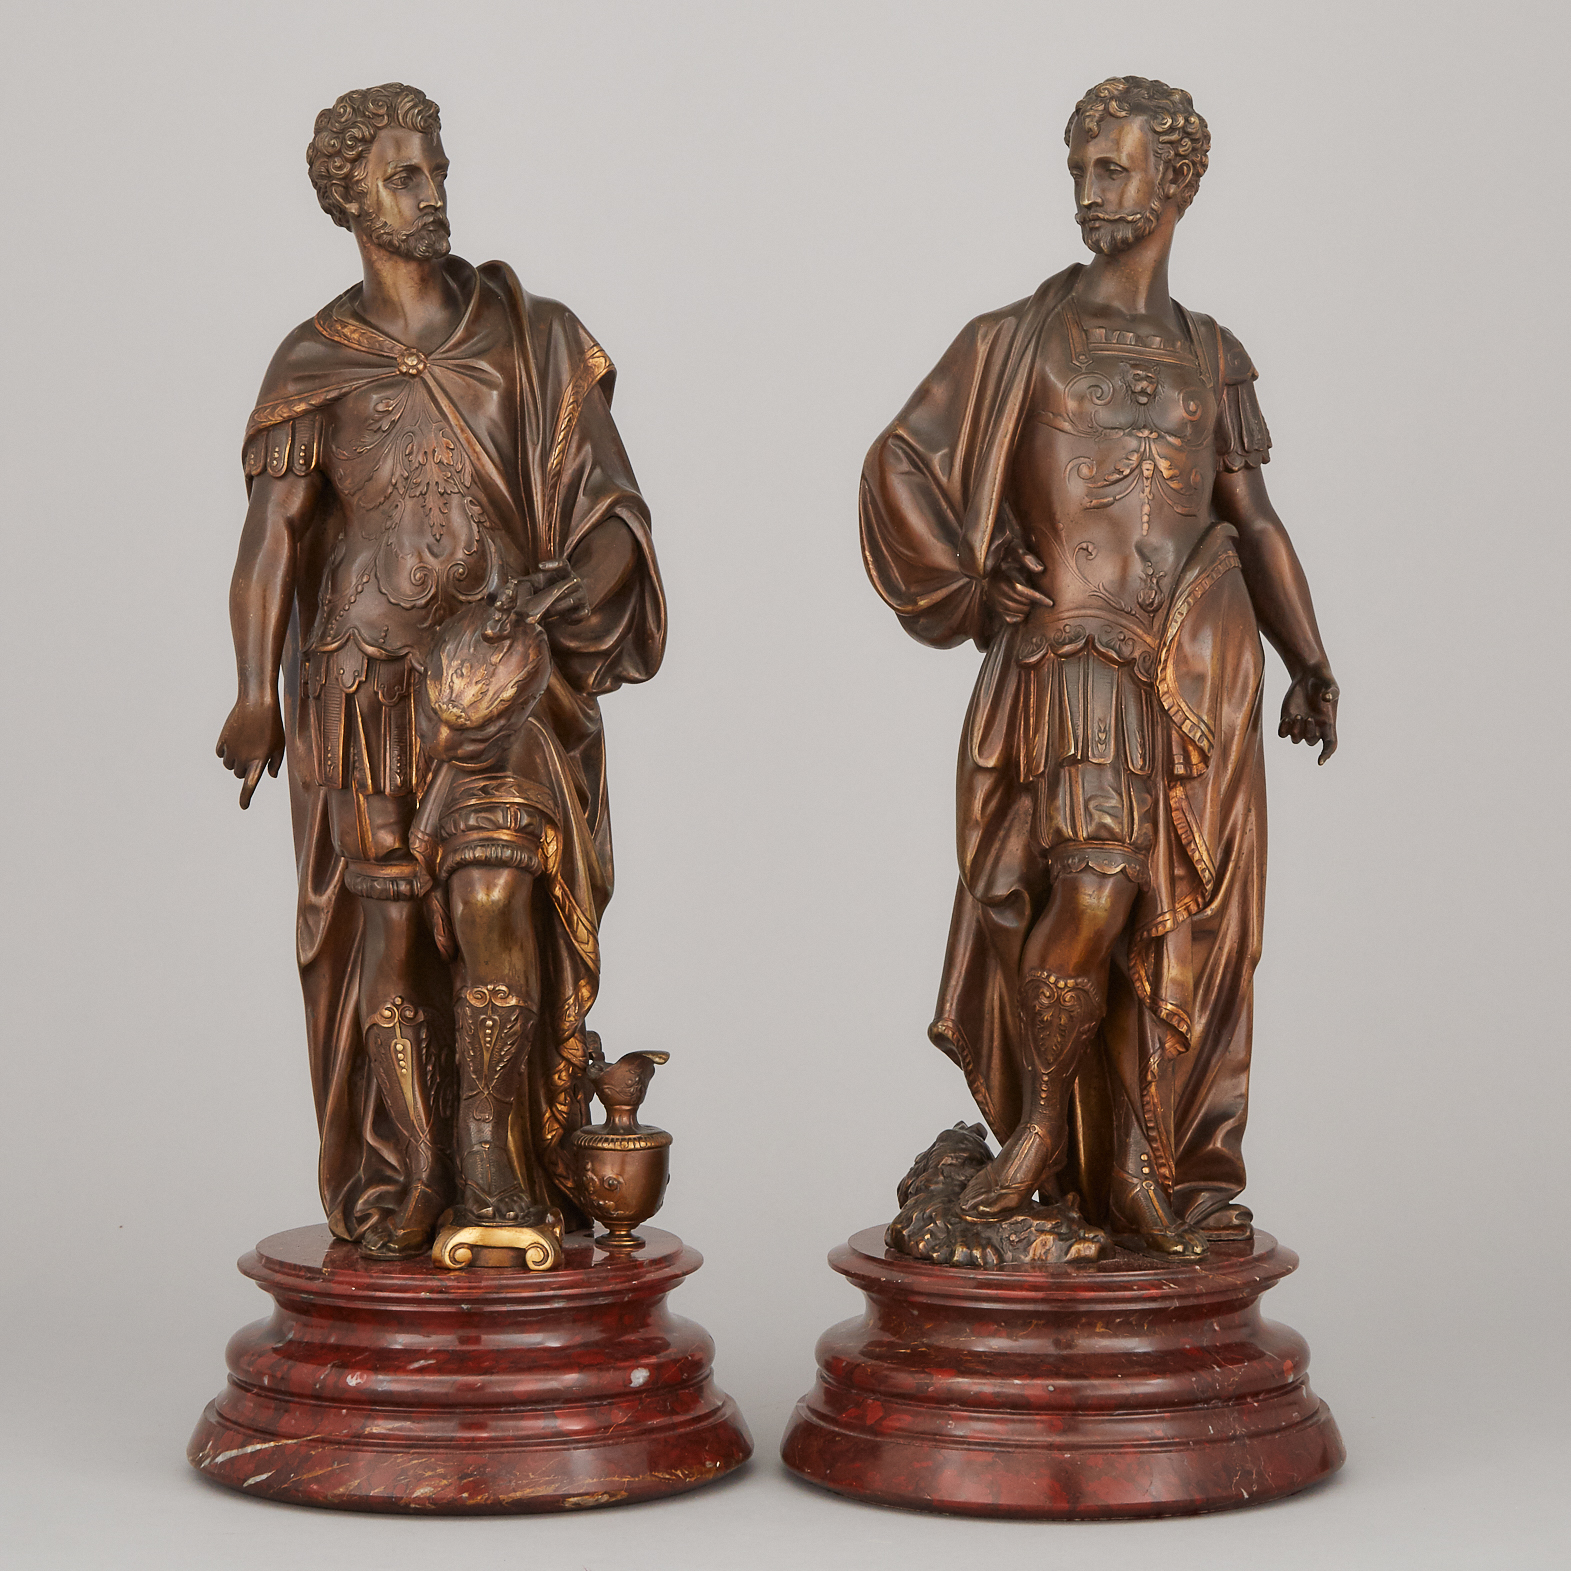 Pair of French School Patinated and Gilt Bronze Figures of Roman Soldiers, 19th century